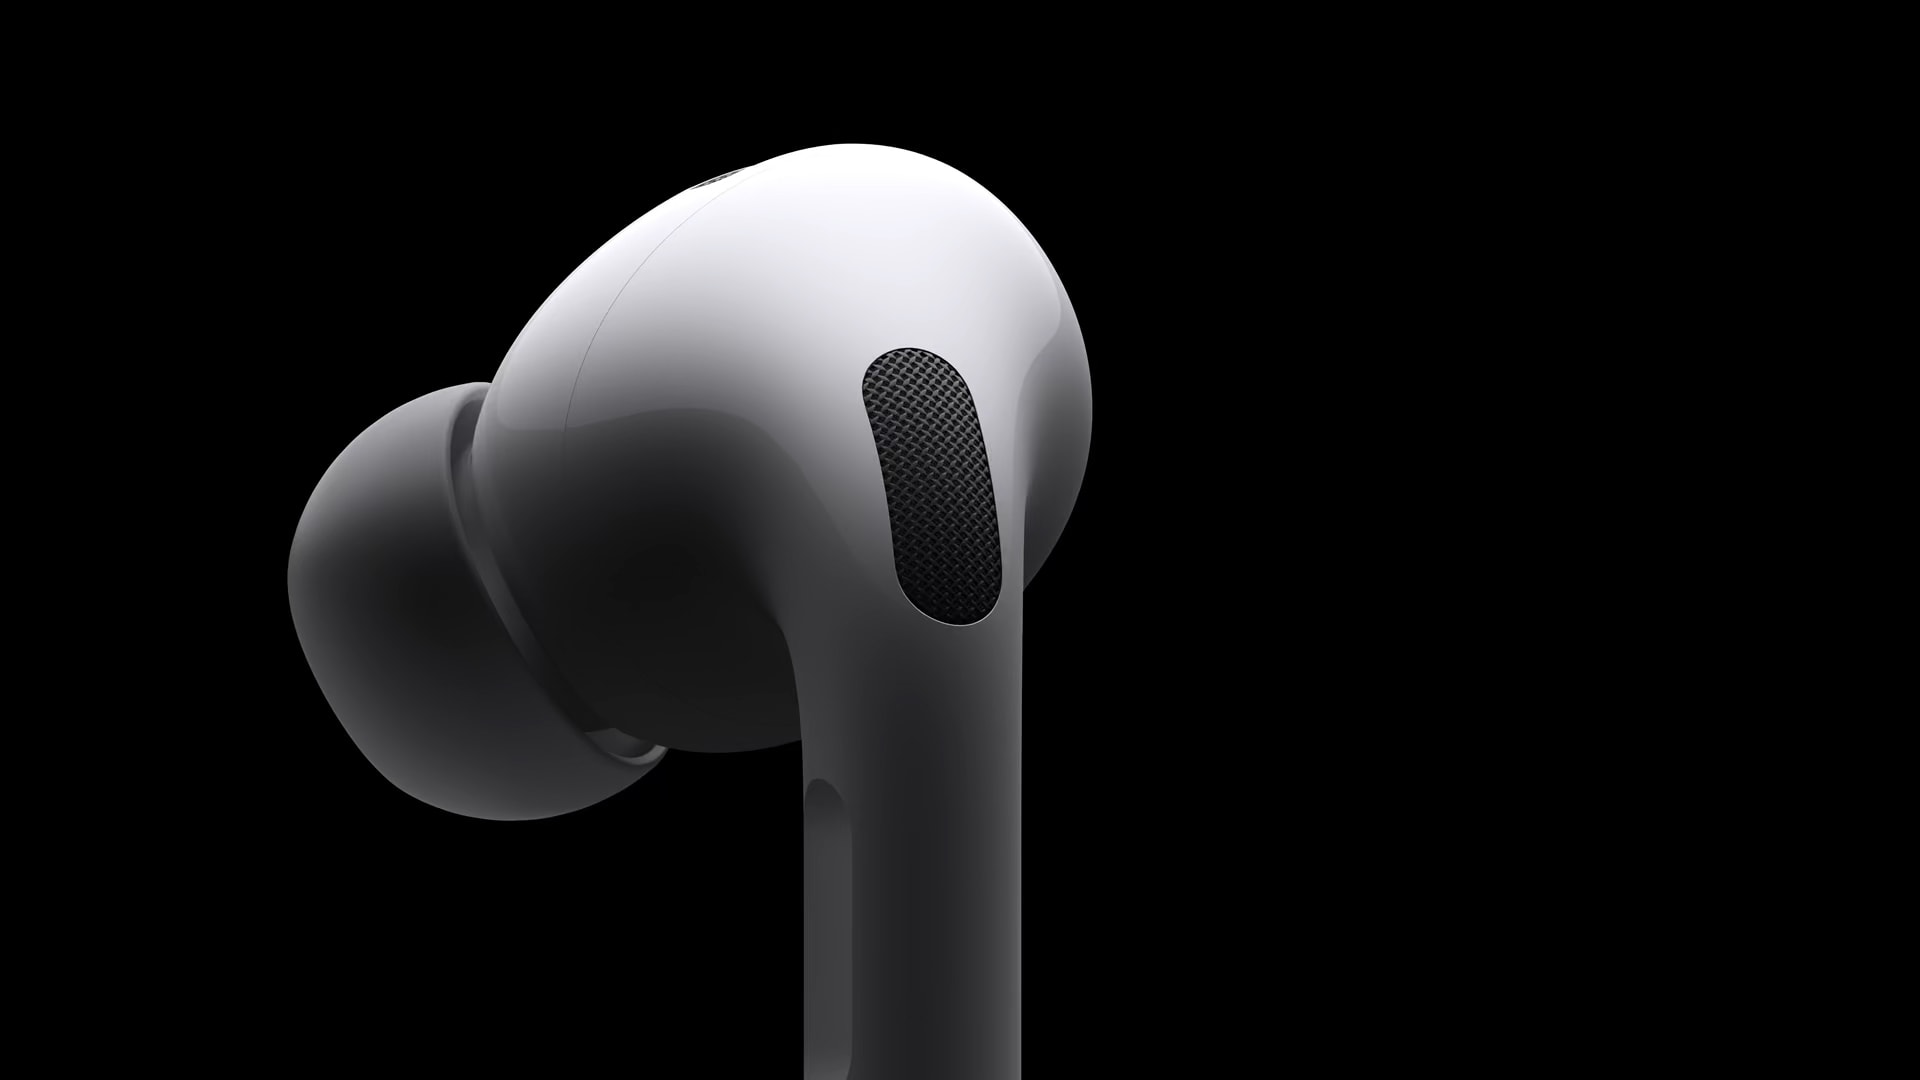 Apple's new AirPods Pro have touch controls